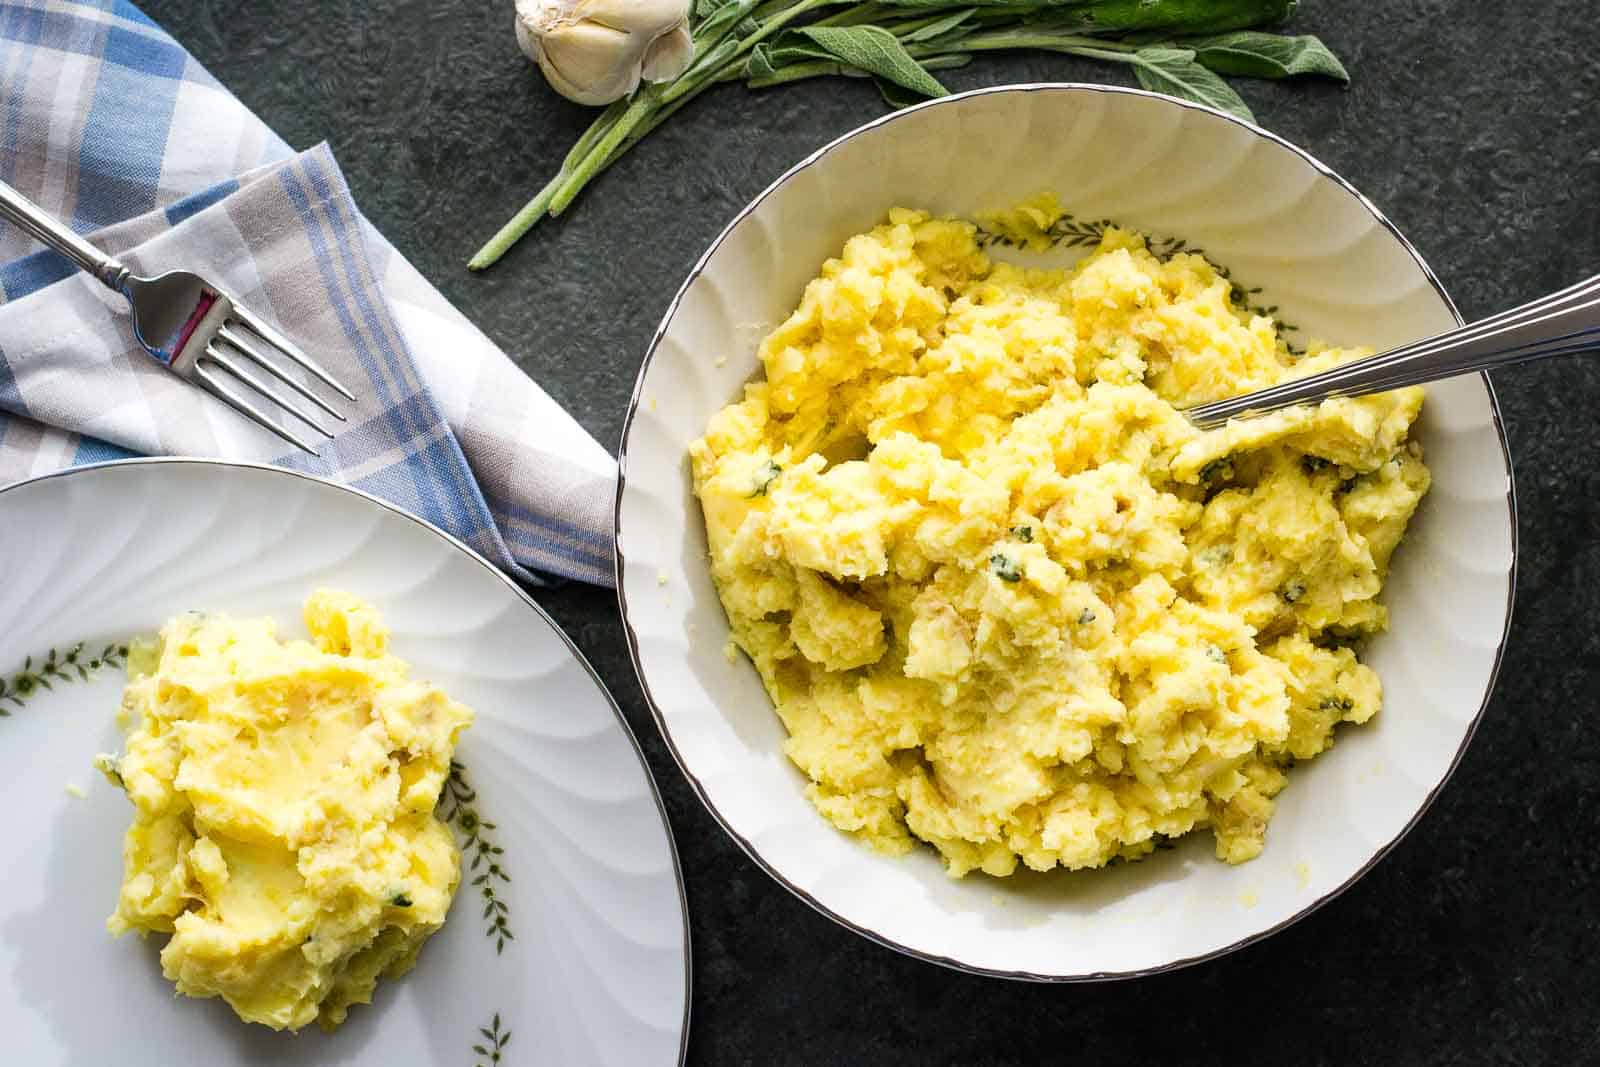 A bowl of brown butter garlic mashed potatoes on a table, next to a serving on a plate.